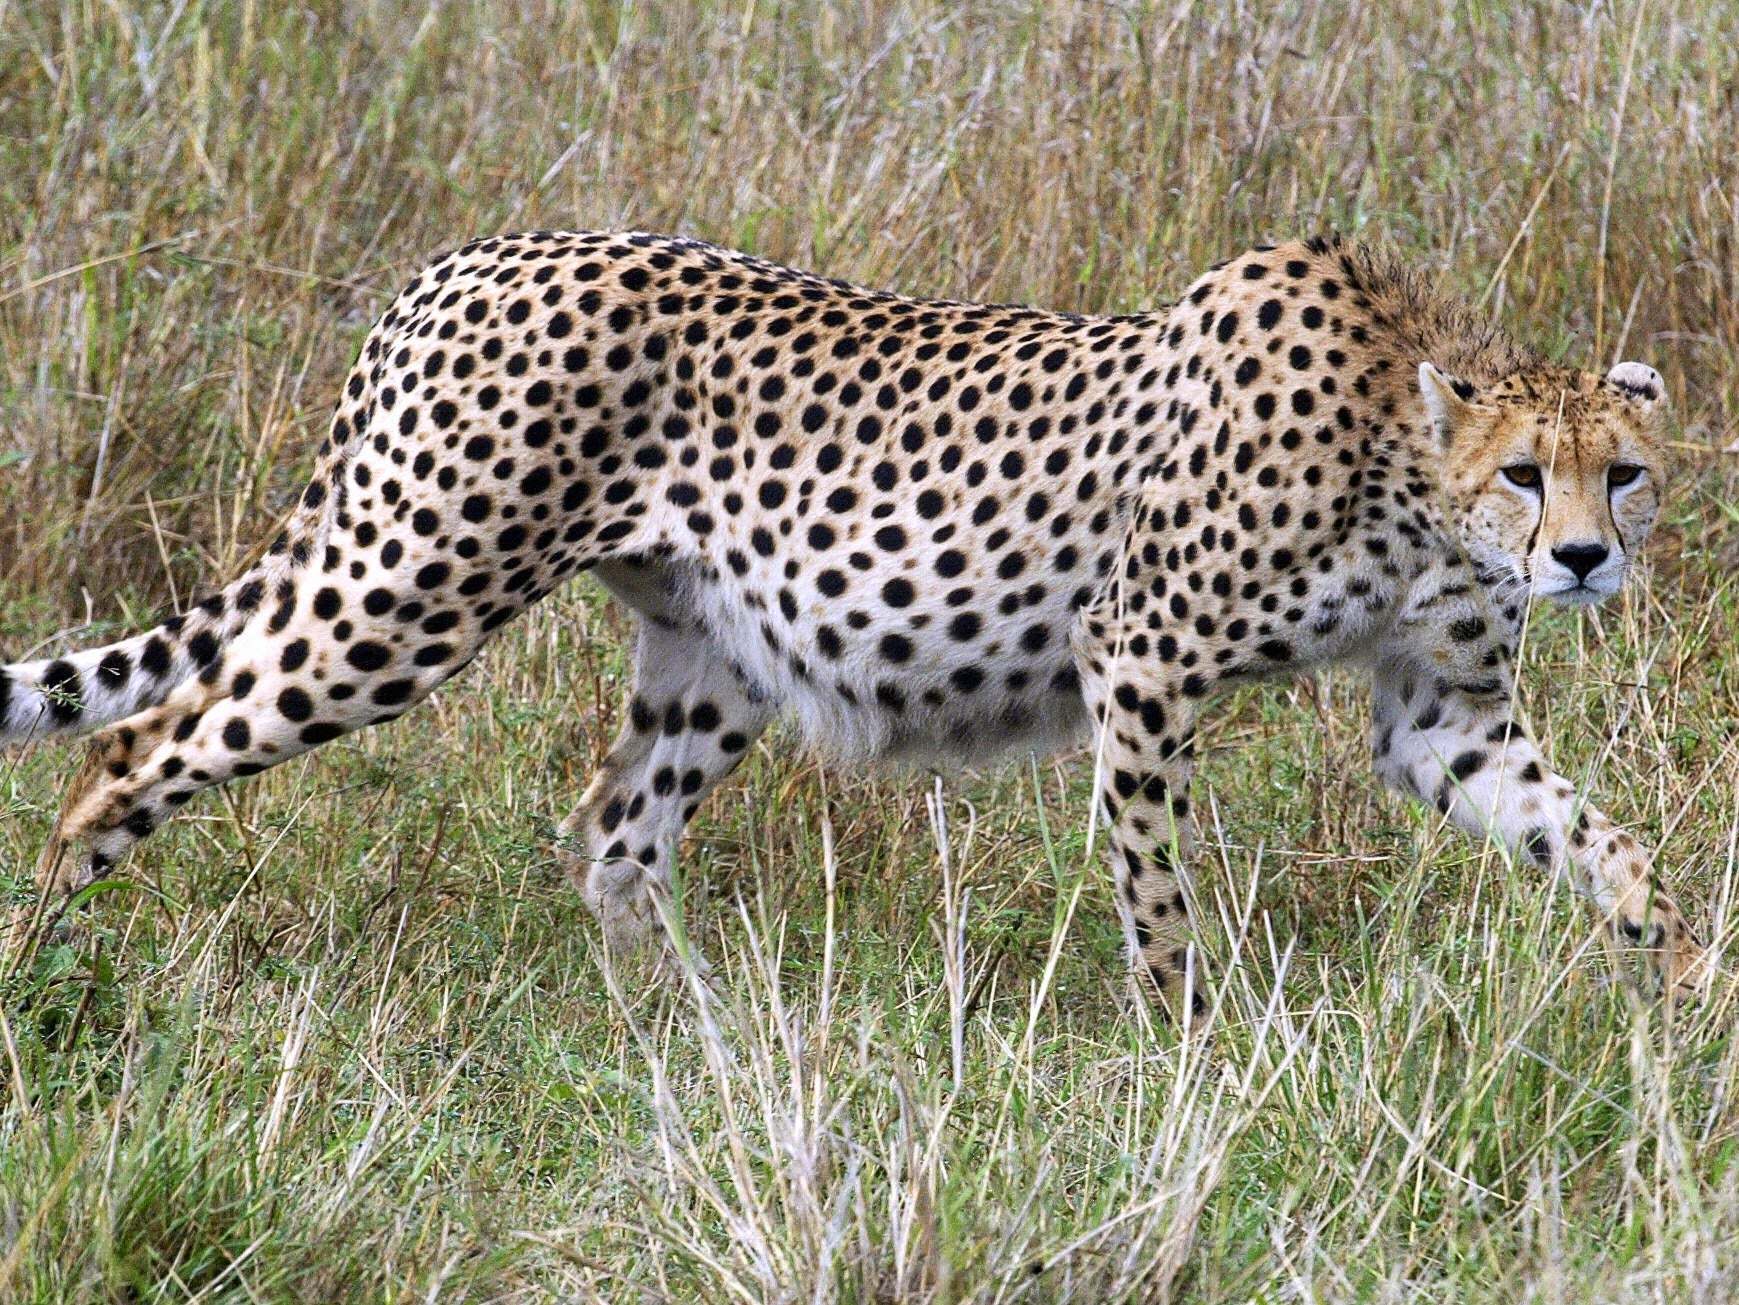 Cheetahs could return to India after being 'hunted to extinction' 70 years ago